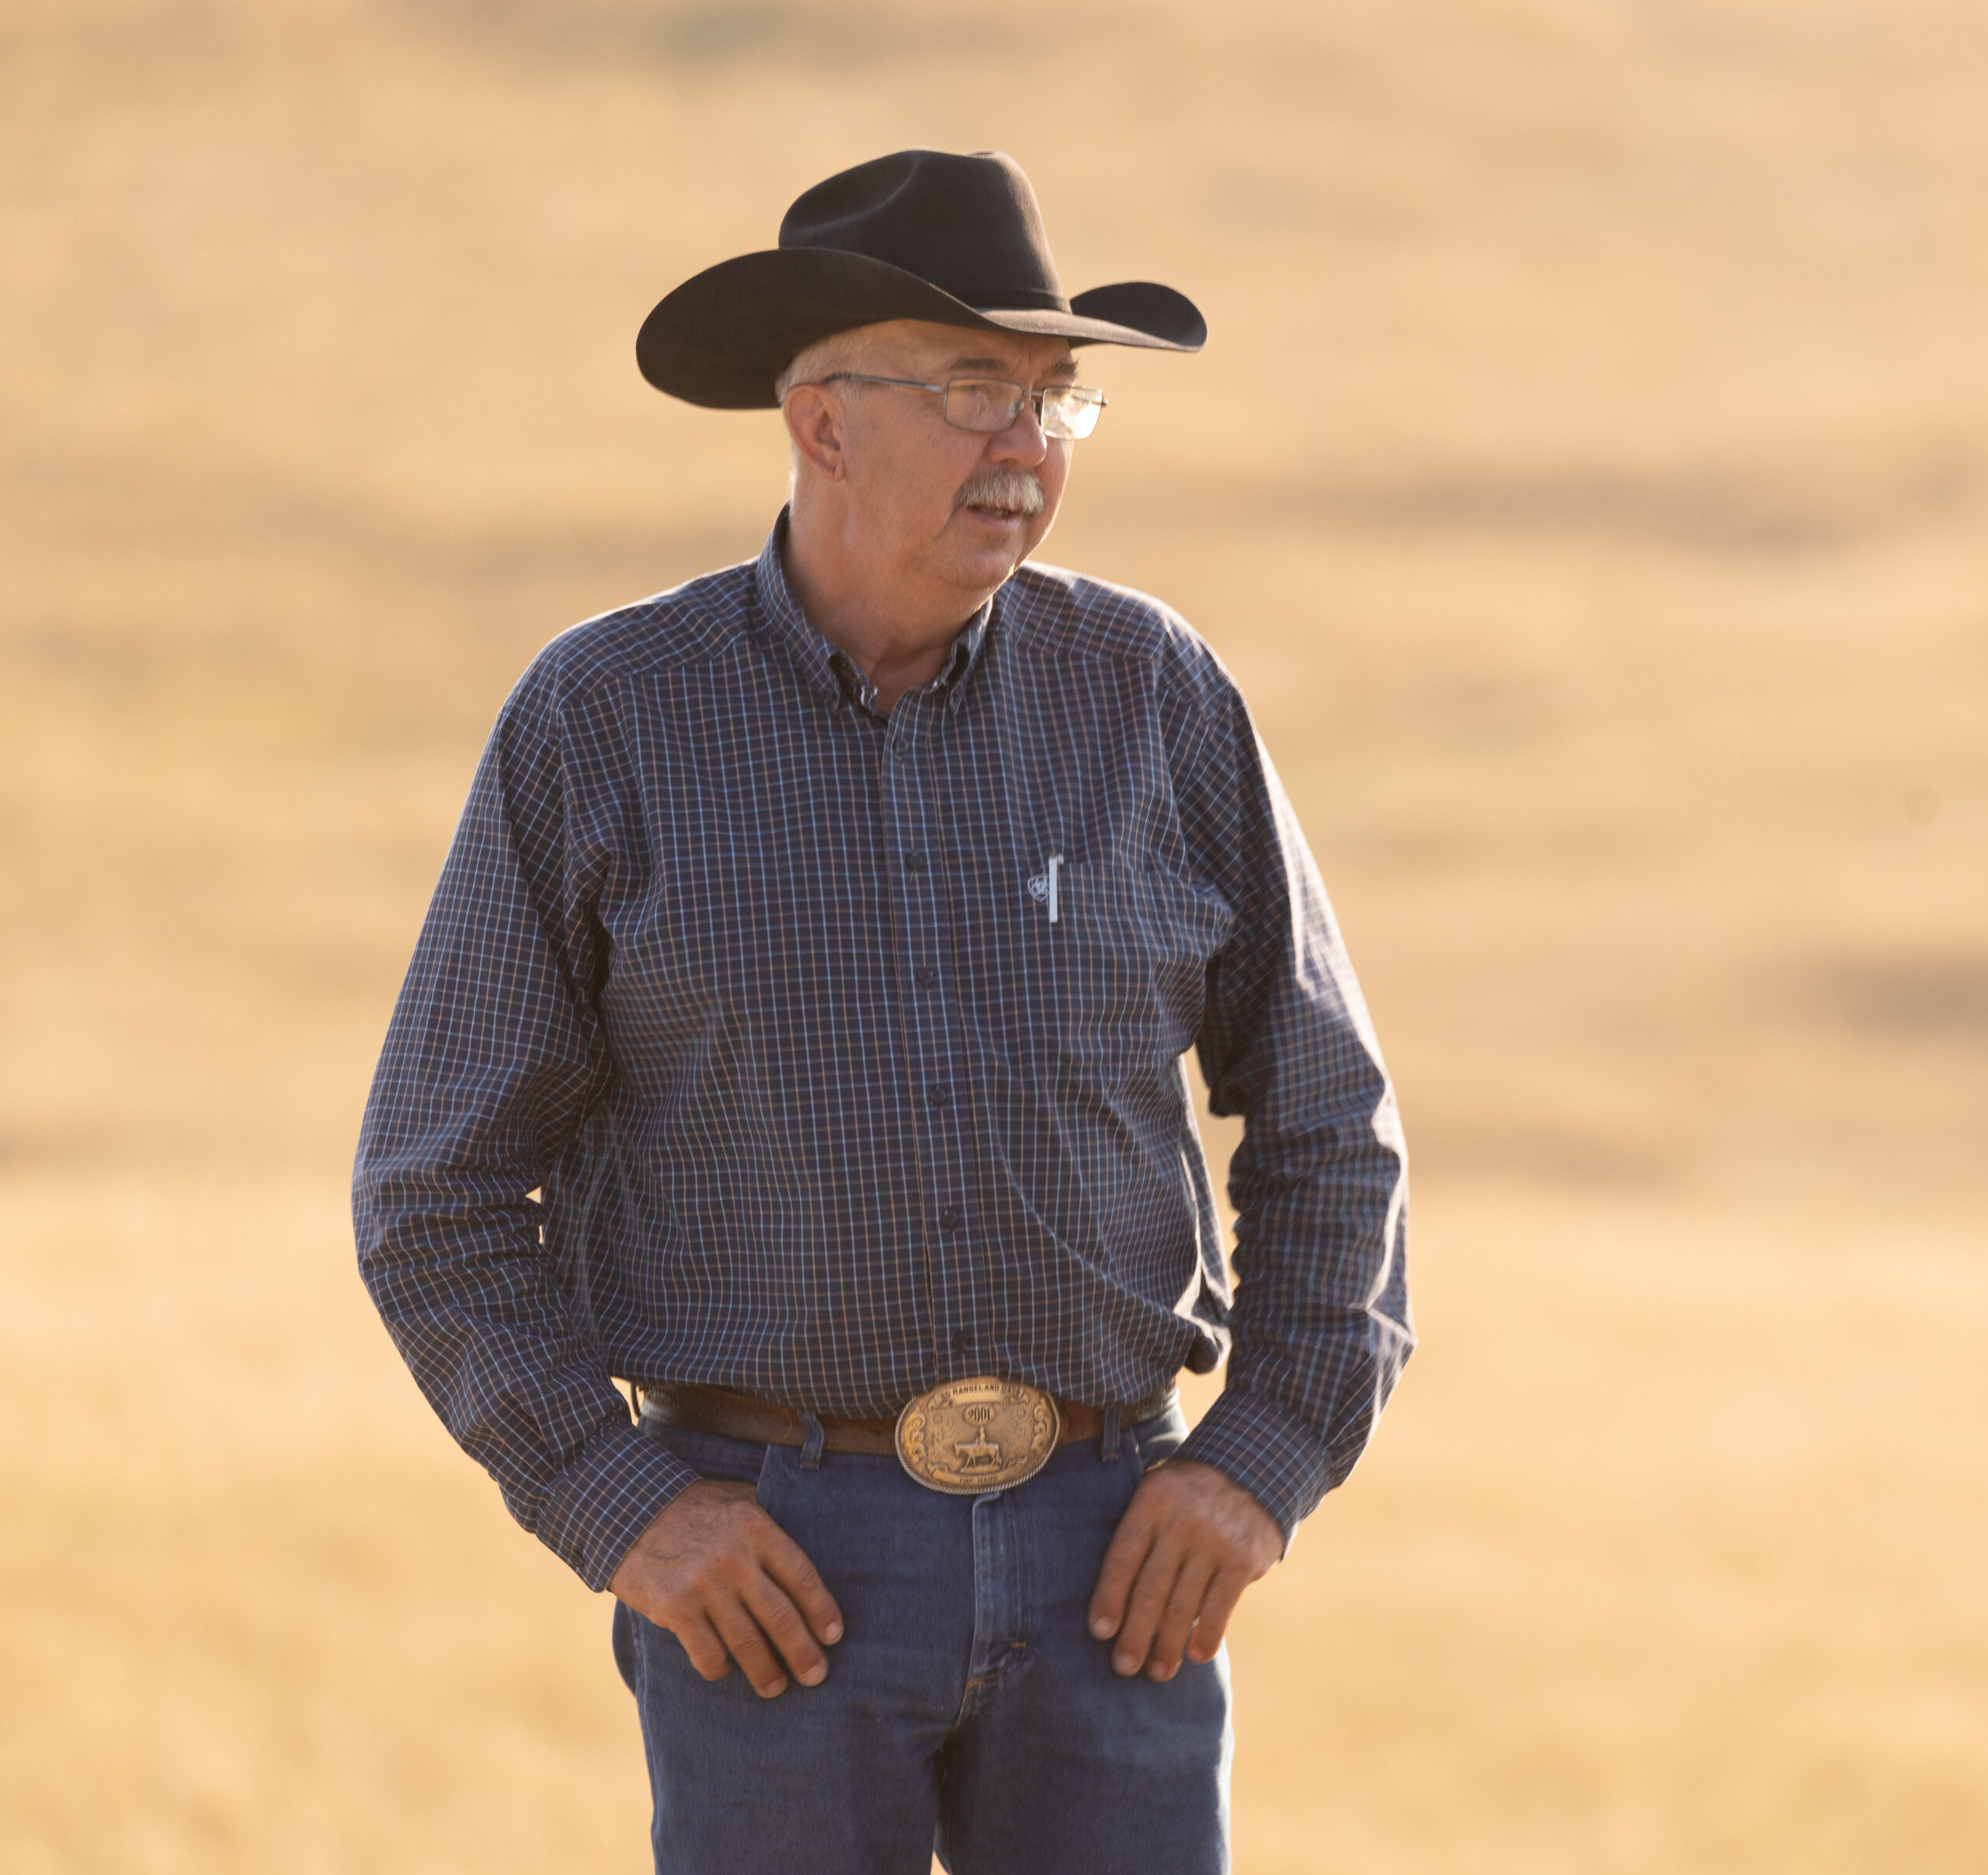 Rancher Ollila wears a cowboy hat and stands in a dormant pasture with his thumbs tucked into his blue jean pockets.